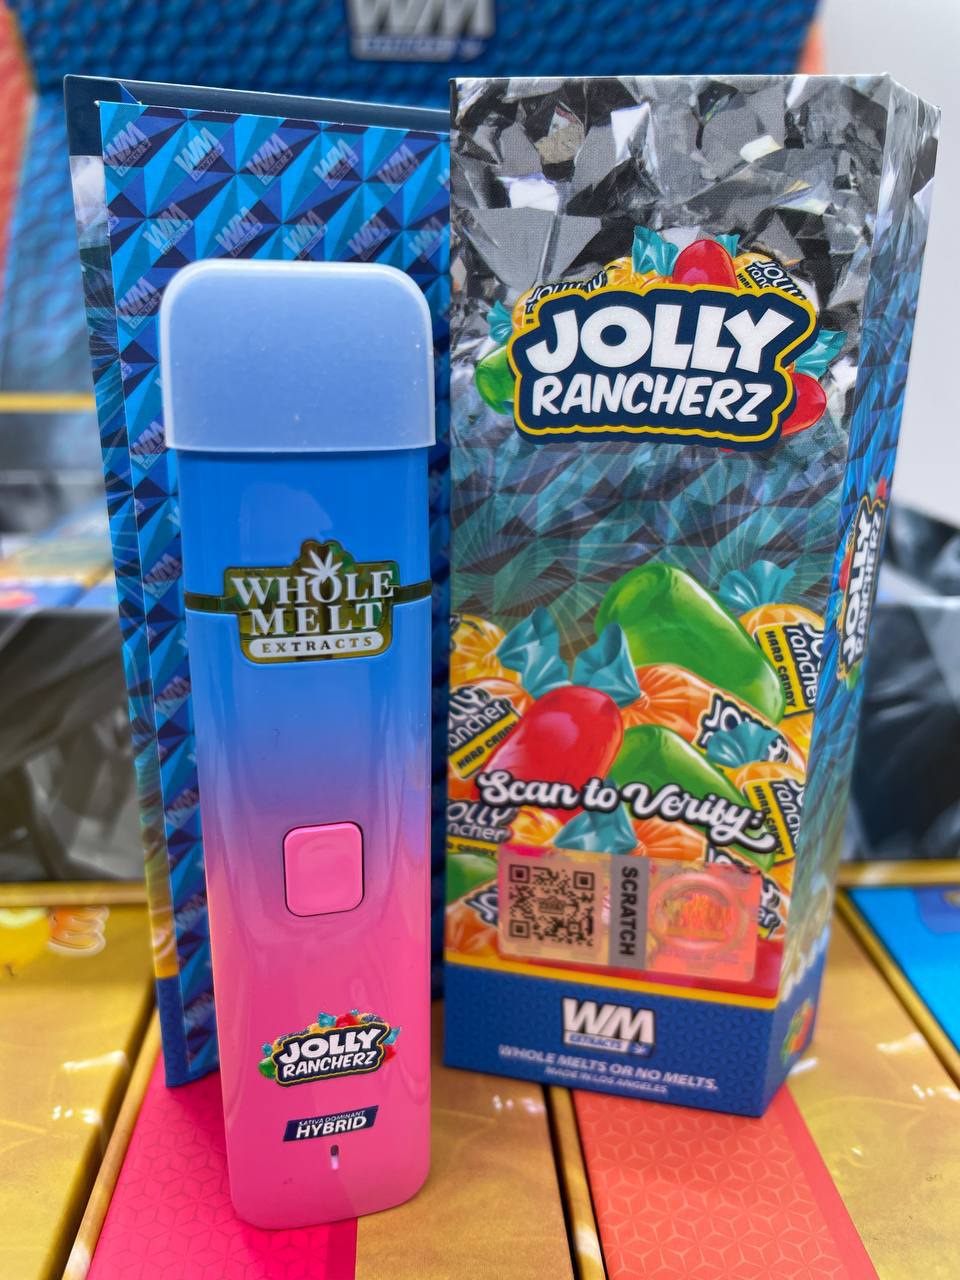 A blue and pink disposable vape pen labeled "Import placeholder for 26" and "Whole Melt Extracts" stands upright next to a box with colorful candy illustrations and the "Import placeholder for 26" logo. The box features a QR code and the text "Scan to Verify.